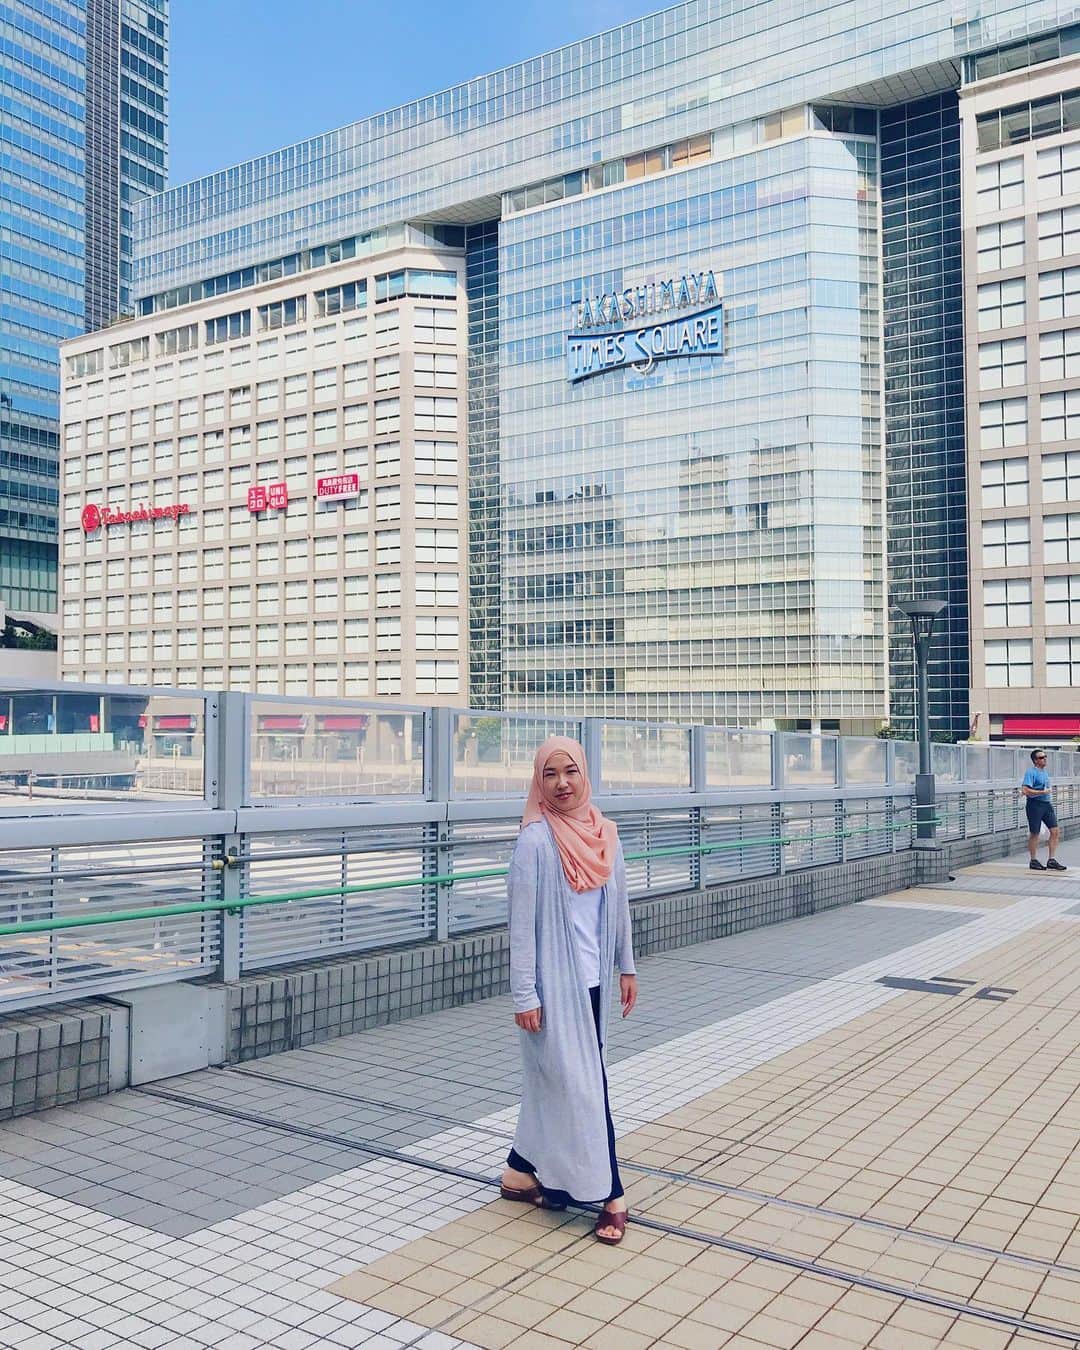 Risa Mizunoのインスタグラム：「Have you been to Shinjuku? It’s one of my favorite areas in Tokyo for jalan-jalan and I find many Hijabi these days🧕❤️ so I shared my Vlog on Youtube to show where we can find a prayer room in Shinjuku! Hope it helps for your travel planning ✨  #japanesemuslim #japanesemuslimah #muslim #muslimah #japan #tokyo #shinjuku #japanese #muslimahtokyo #hijab #travel #japantrip #tokyotrip #traveljapan #japanlife #musliminjapan #🇲🇾 #🇯🇵 #shinjuku」